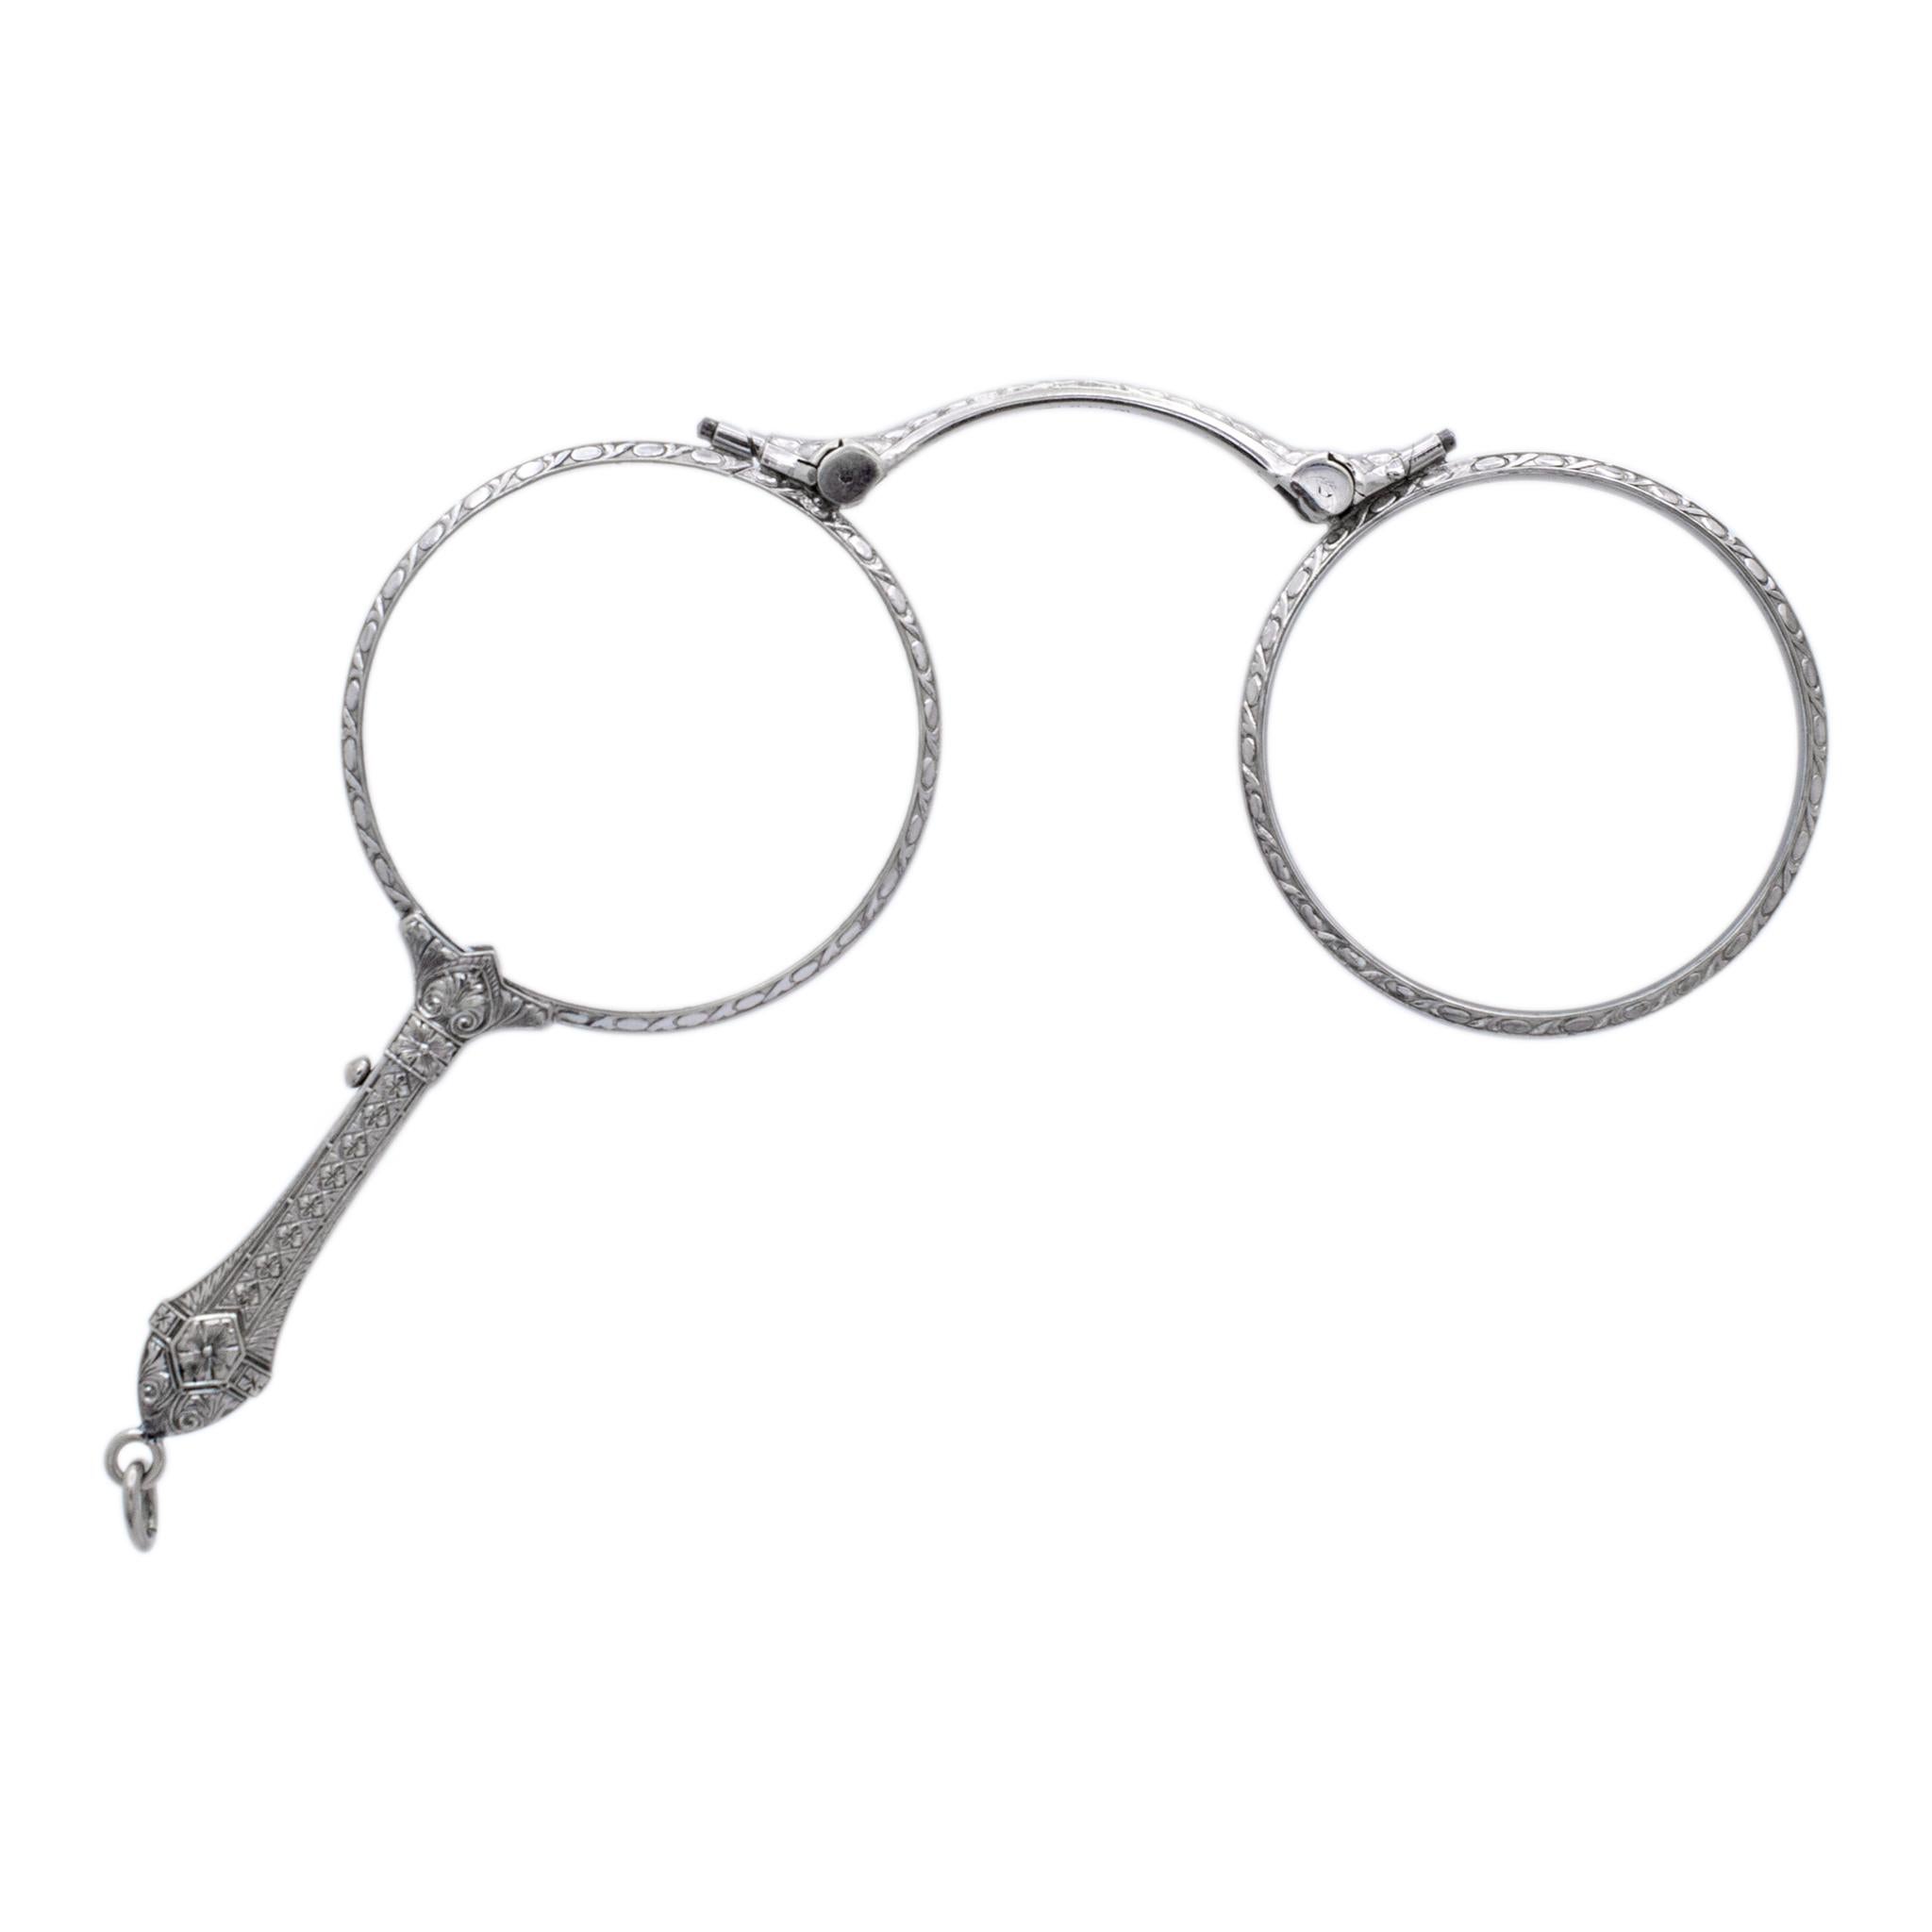 Metal Type: 14K White Gold

Length: 3.00 inches

Width: 4.00 inches

Weight: 22.16 grams

14K white gold art-deco (1920-1930) folding lorgnette folding eye glasses. The metal was tested and determined to be 14K white gold. Engraved with 